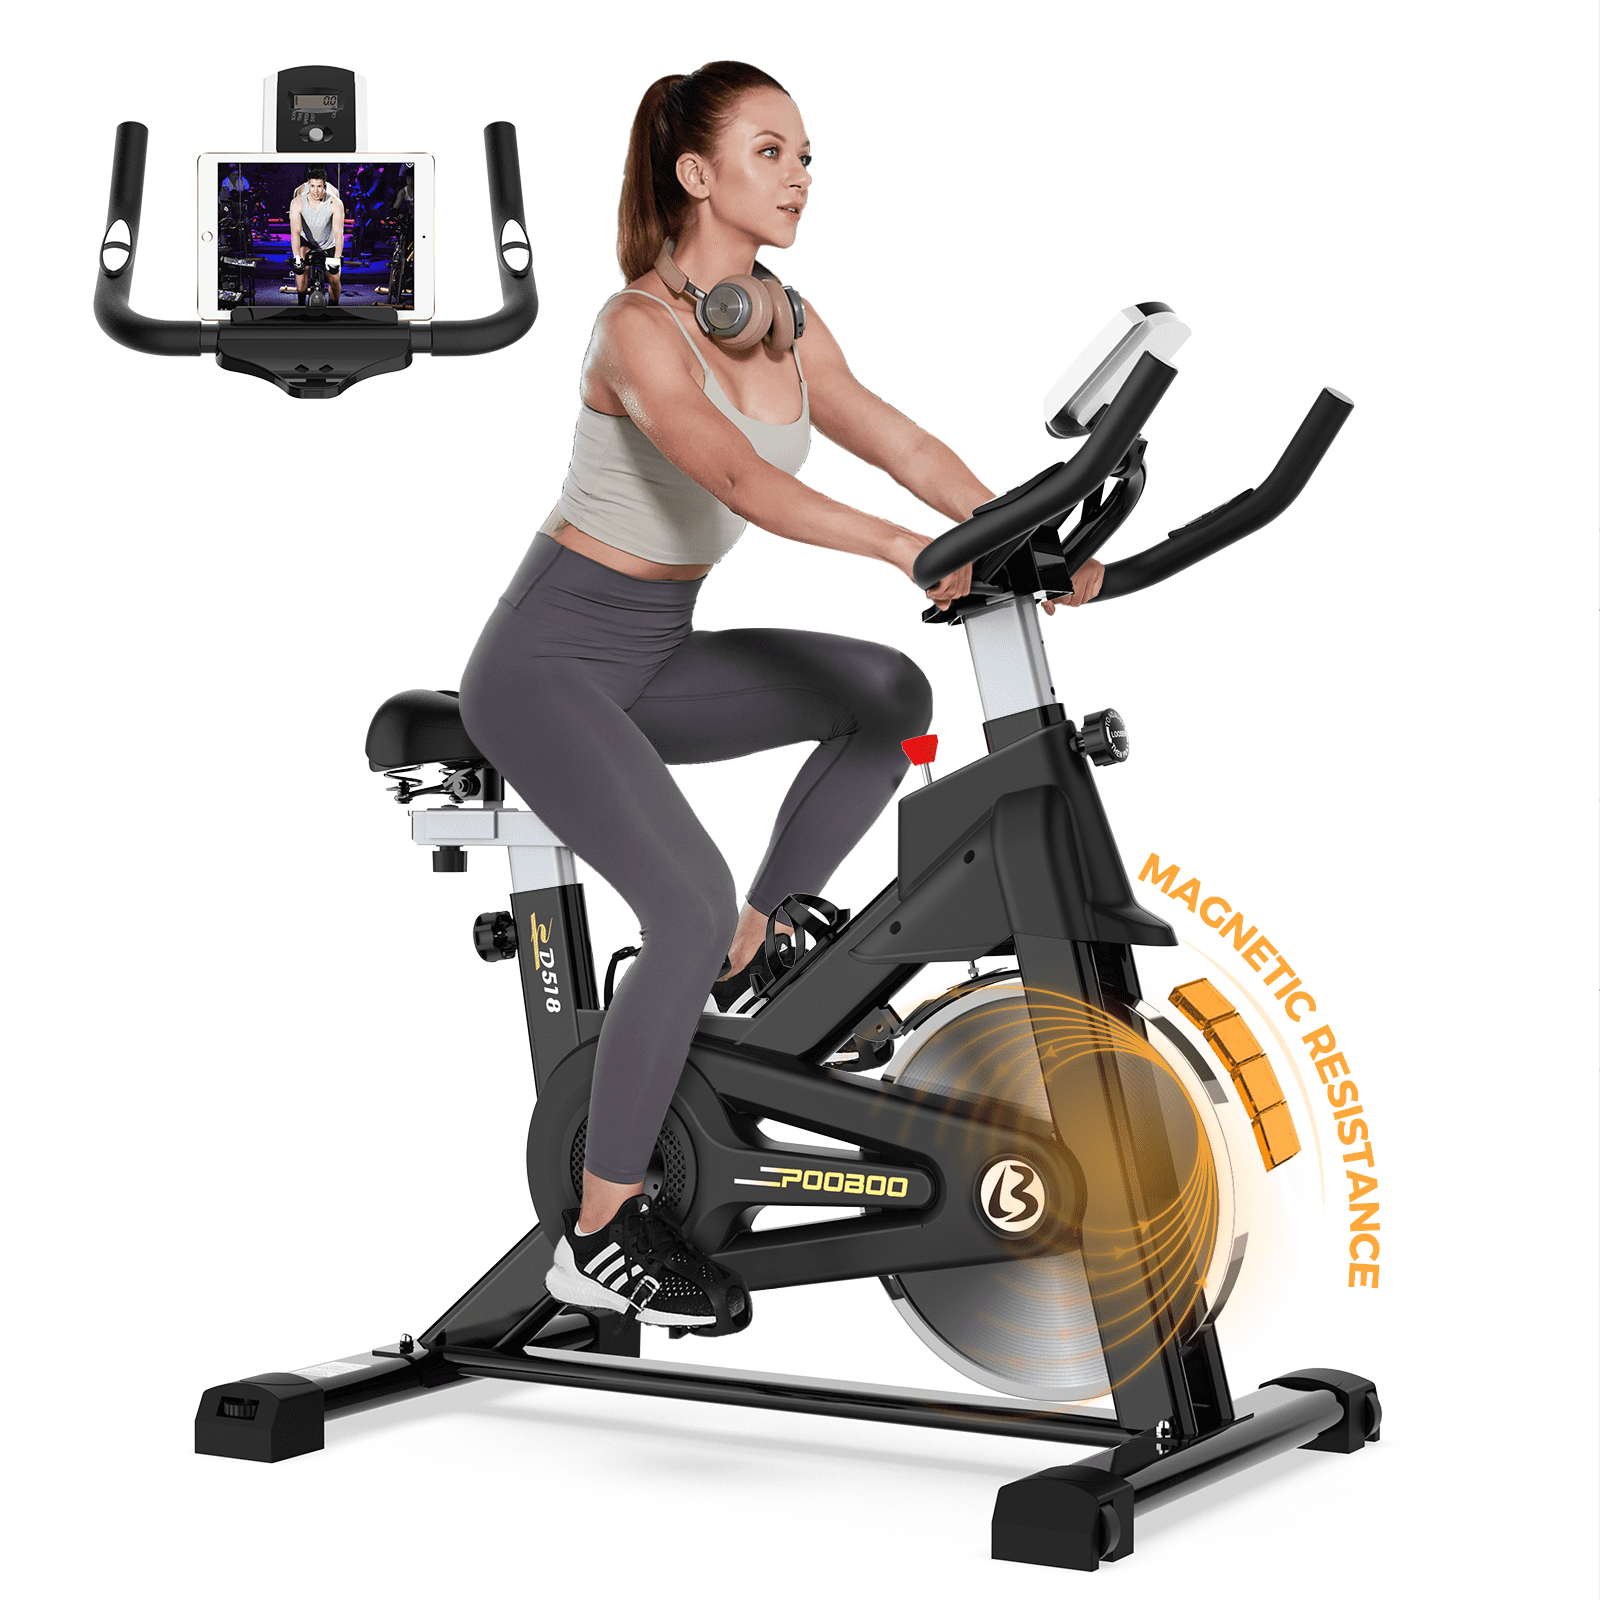 Pooboo Indoor Exercise Bike Stationary Cycling Bicycle Cardio Fitness Workout 